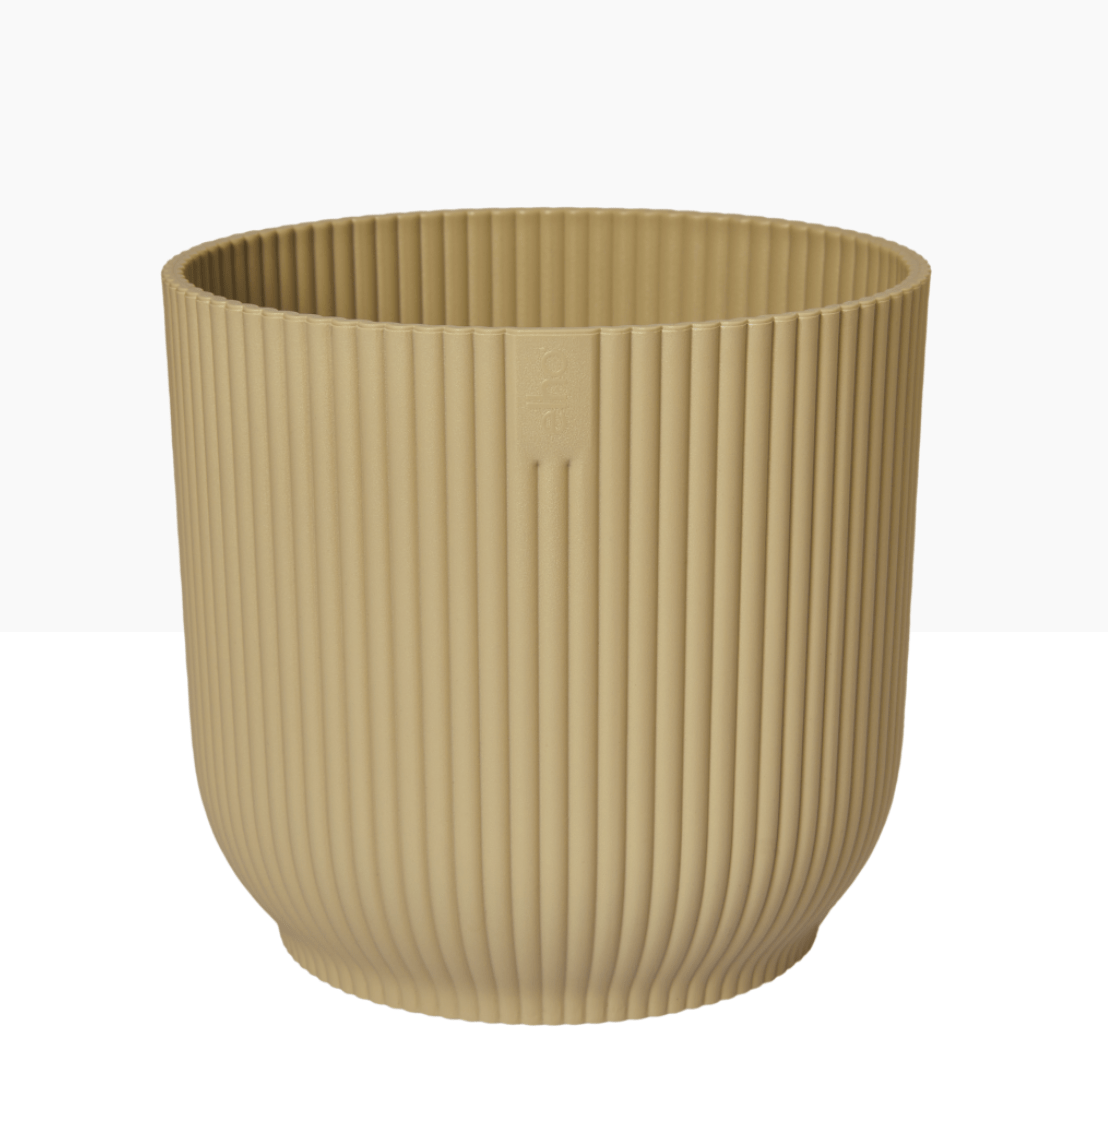 Elho Plant Pots 14 / Butter Yellow Recycled Plastic Plant Pot - 'Vibes Fold' in Butter Yellow